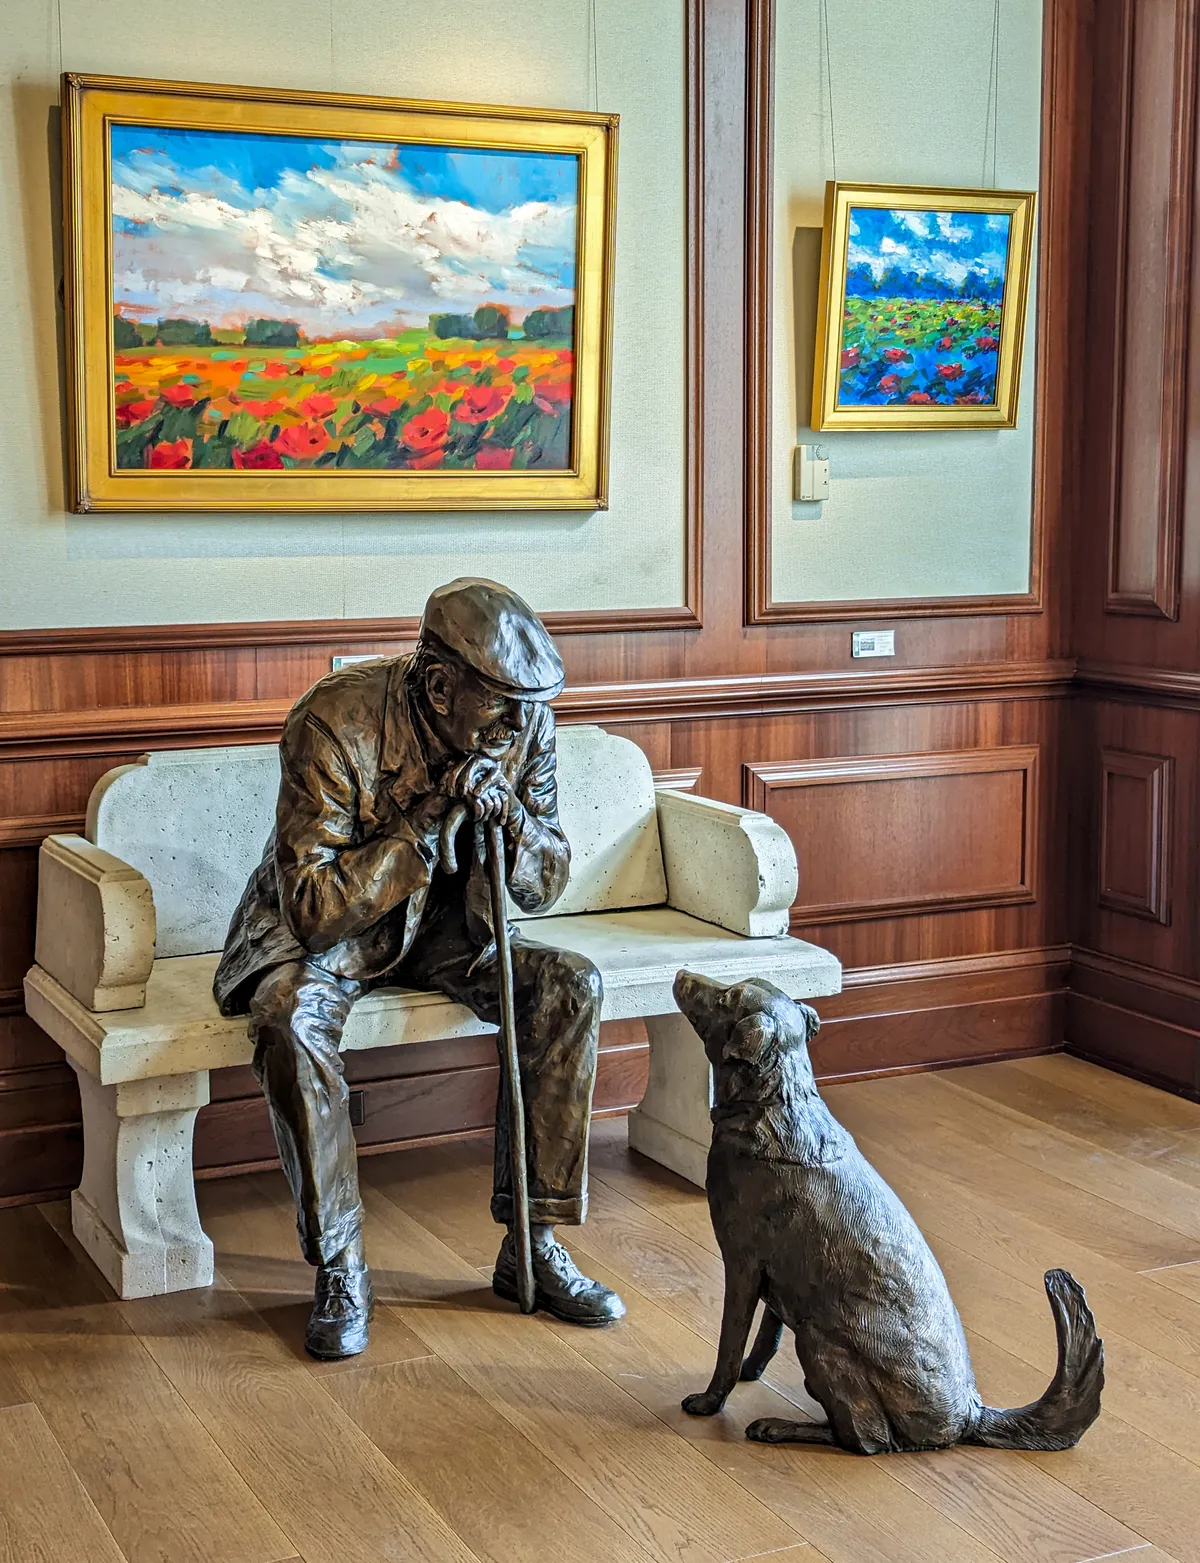 The Hardy Family Art Collection on display at Nemacolin. 2 painting and a sculpture of a man and dog. 